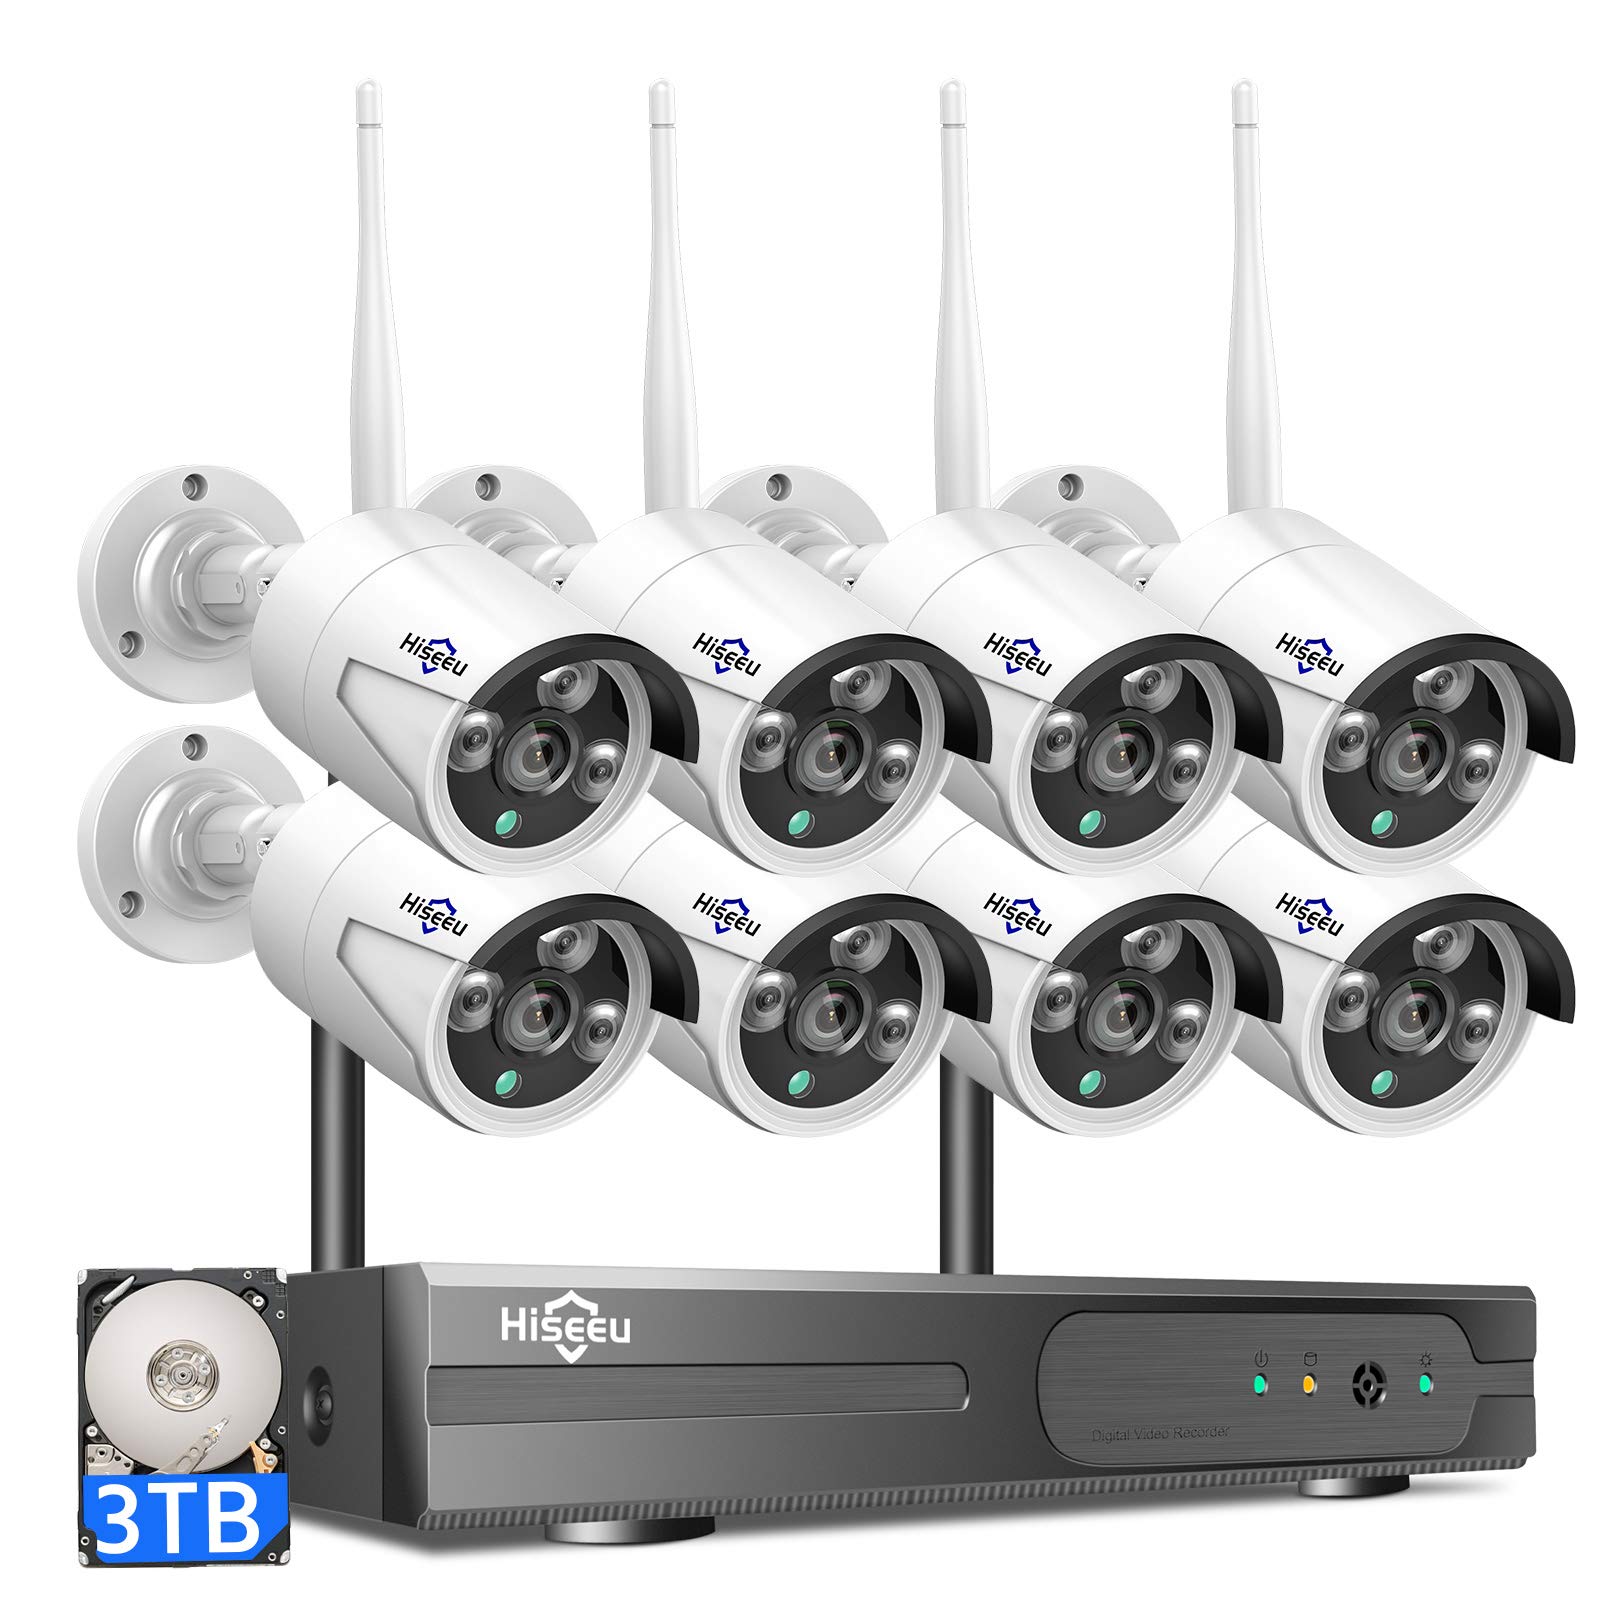 Book Cover Hiseeu 2K Wireless Security Camera System, 10CH NVR Kit,8Pcs 3MP WiFi Surveillance Cameras for Home Indoor/Outdoor Use,Night Vision,Waterproof, Motion Detection, 3TB Hard Drive and DC Power Included Fixed System with 3TB HDD